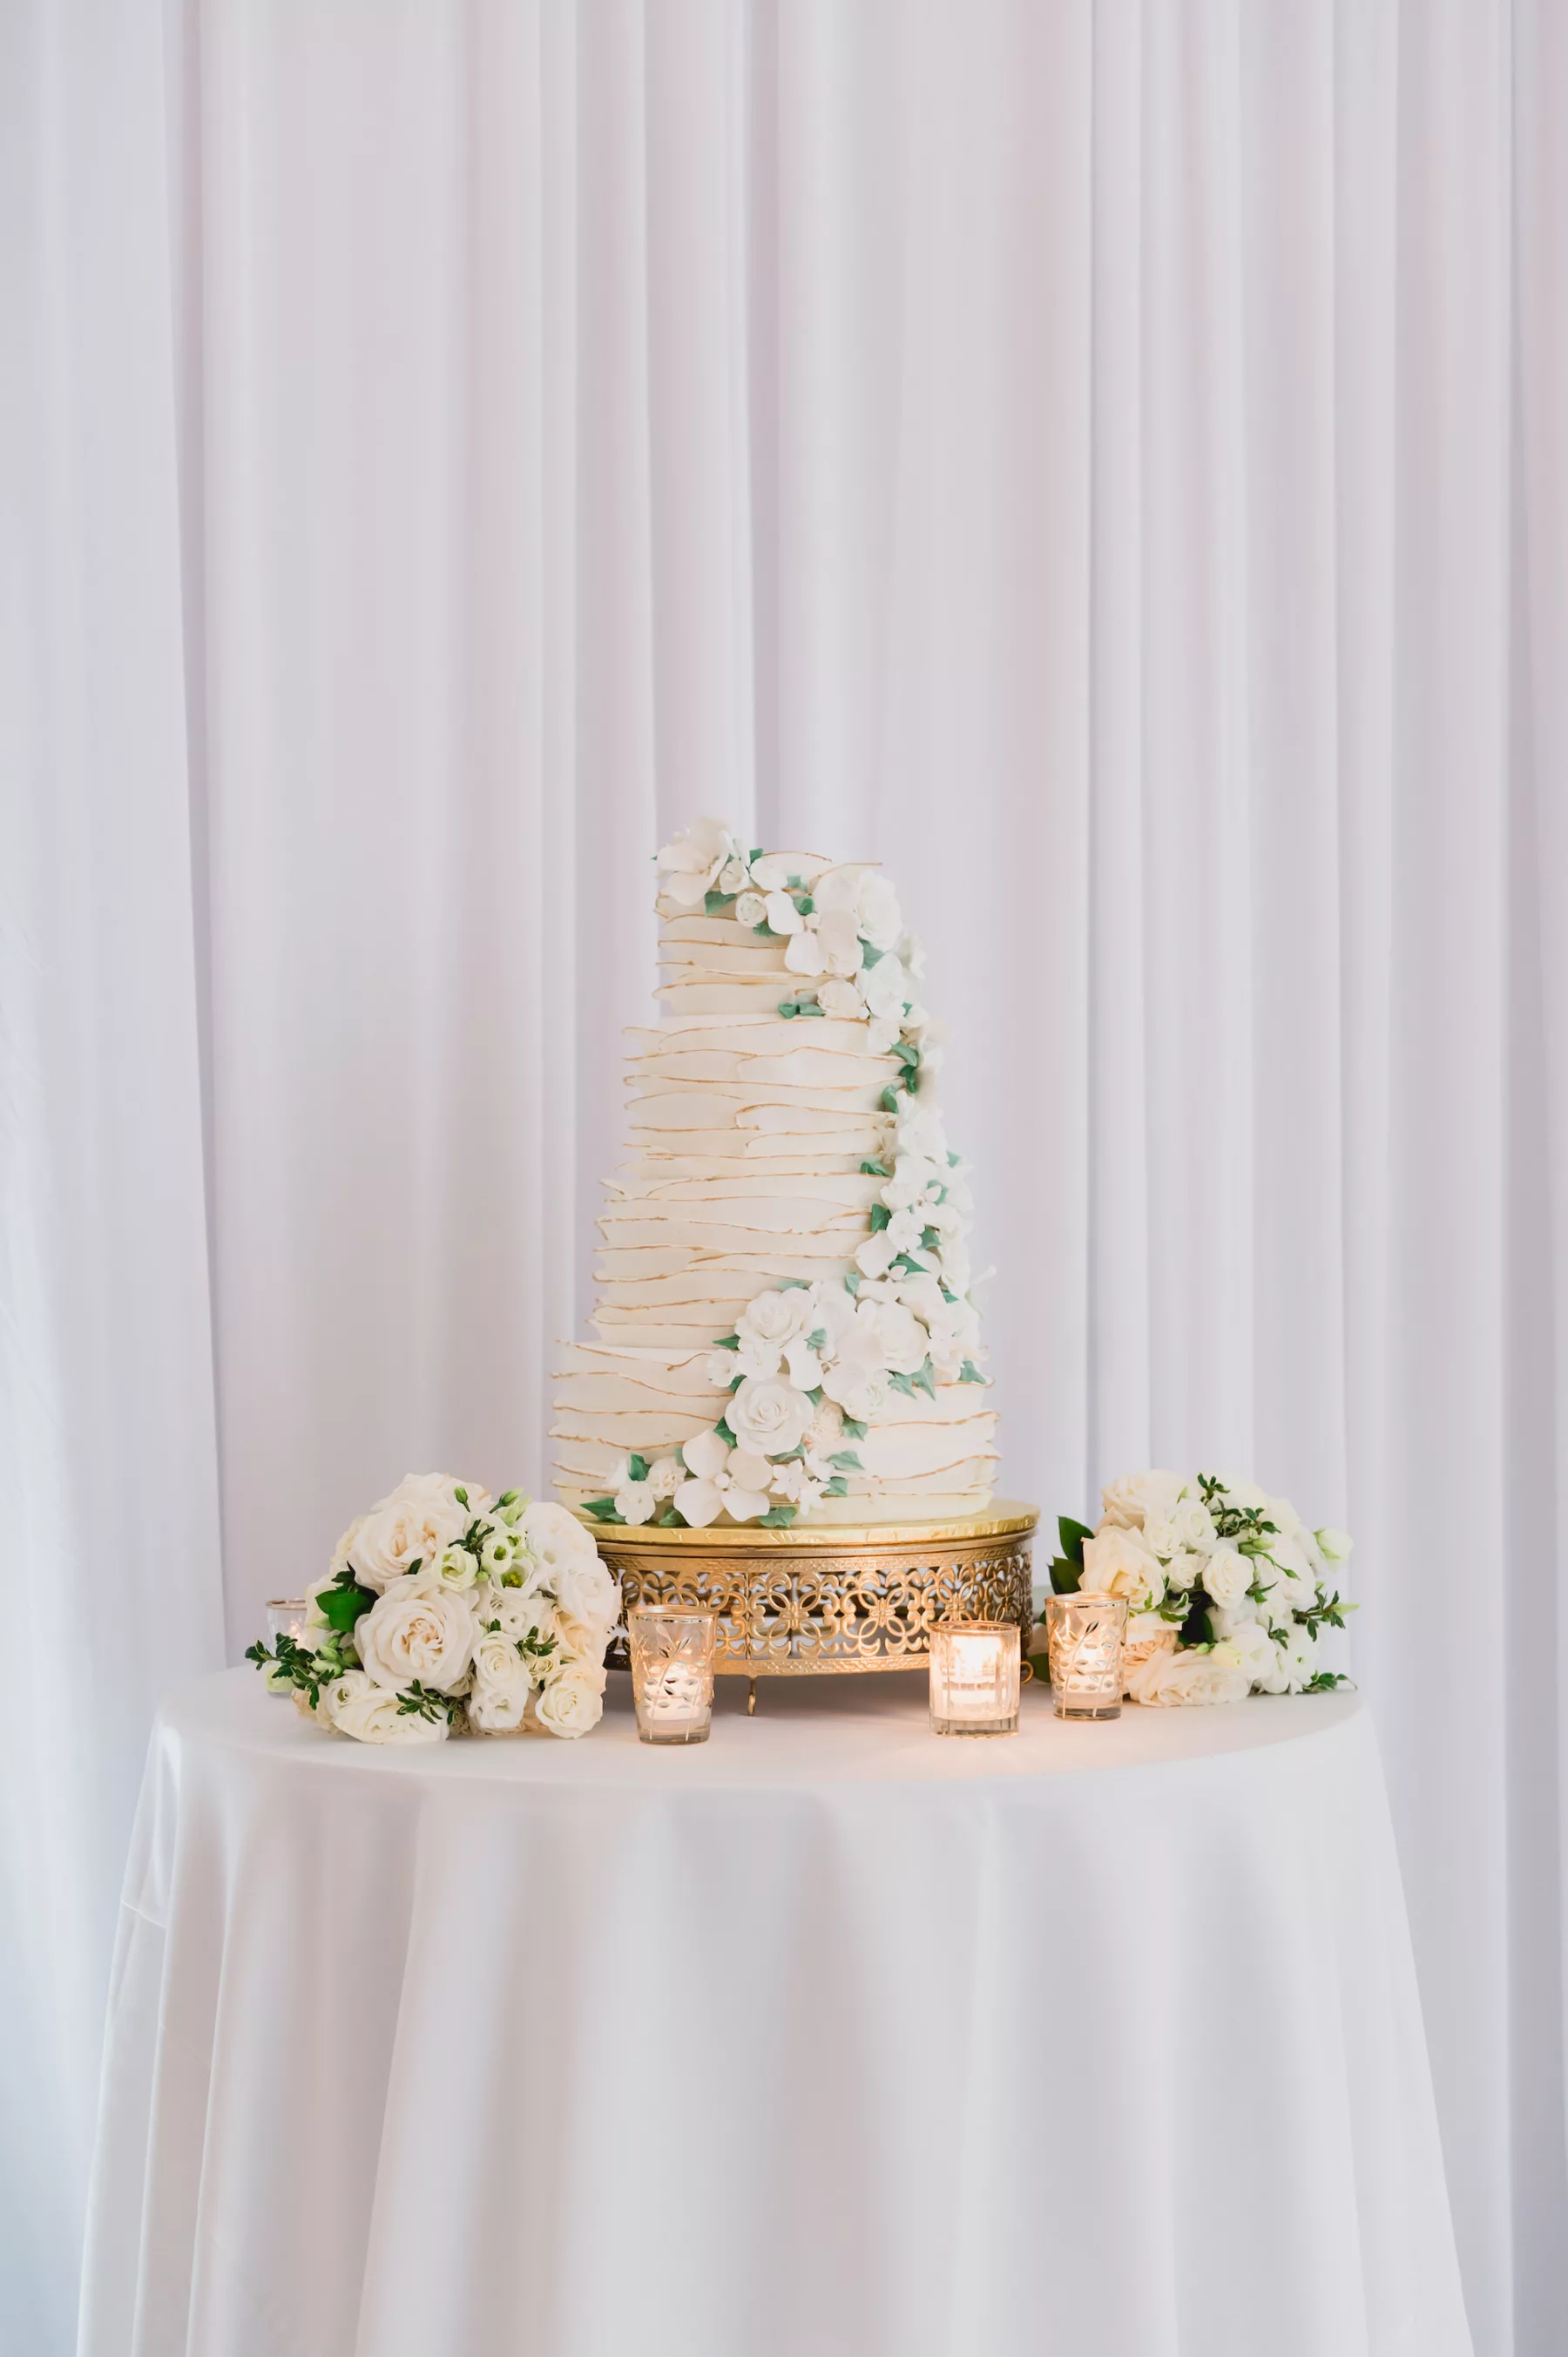 Round Four-Tiered Textured White and Gold Wedding Cake with Edible Flowers Inspiration | Classic Cake Table Decor Inspiration